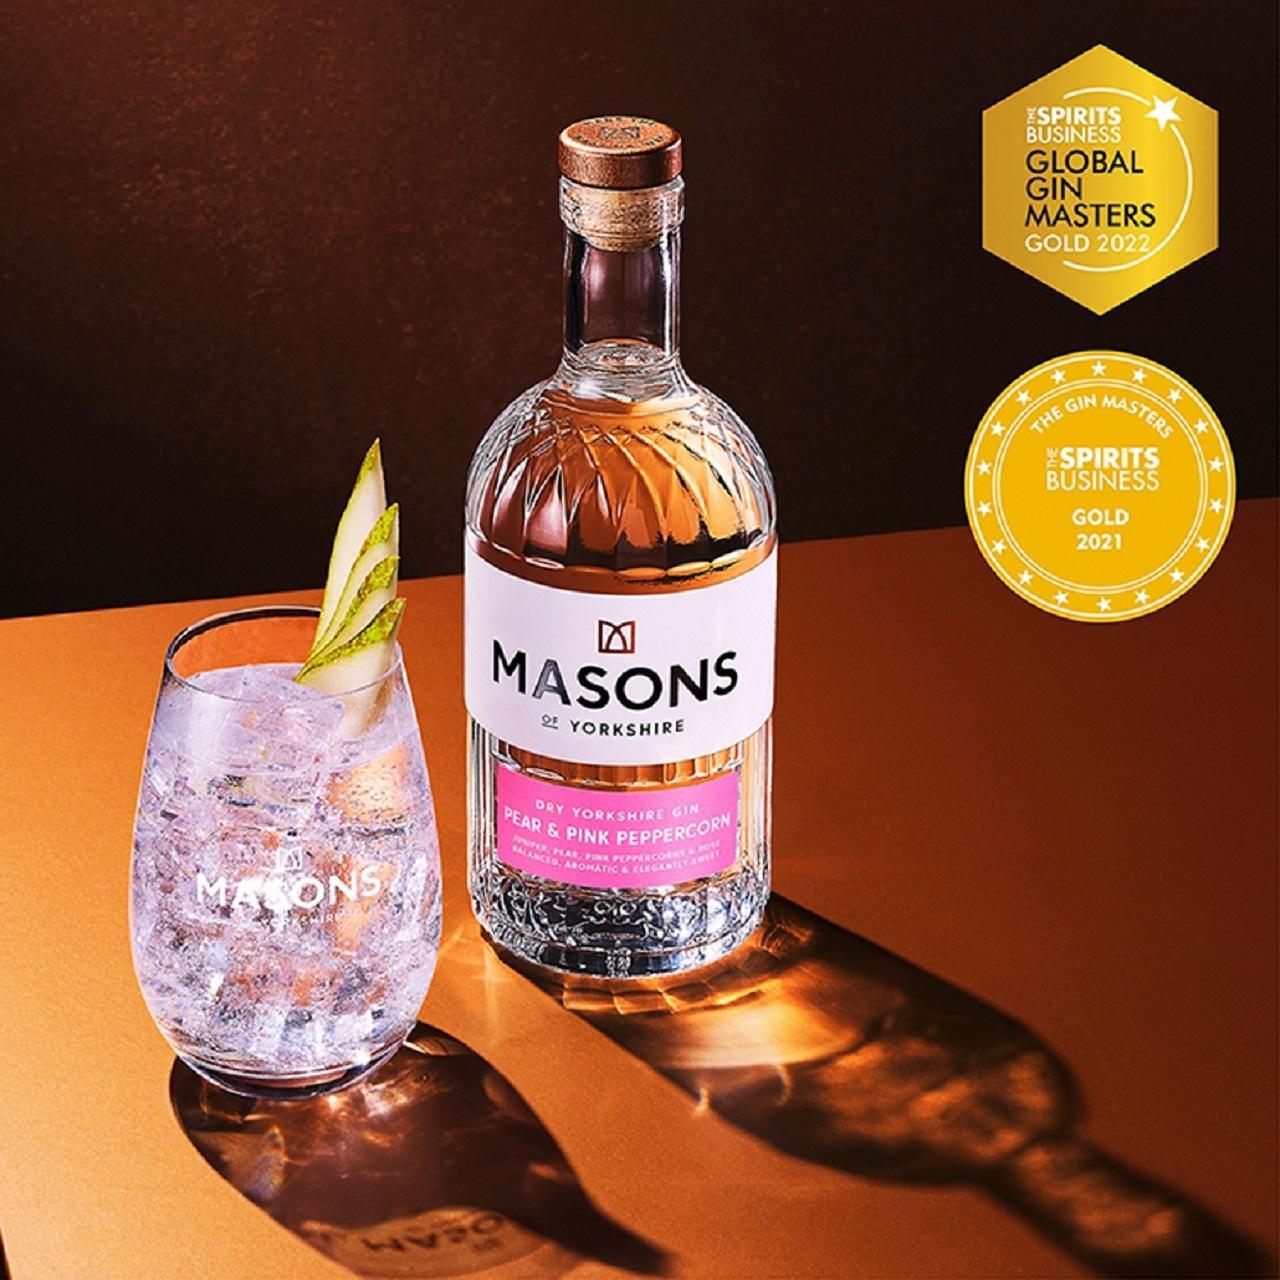 Masons of Yorkshire Pear & Pink Peppercorn Gin 70cl